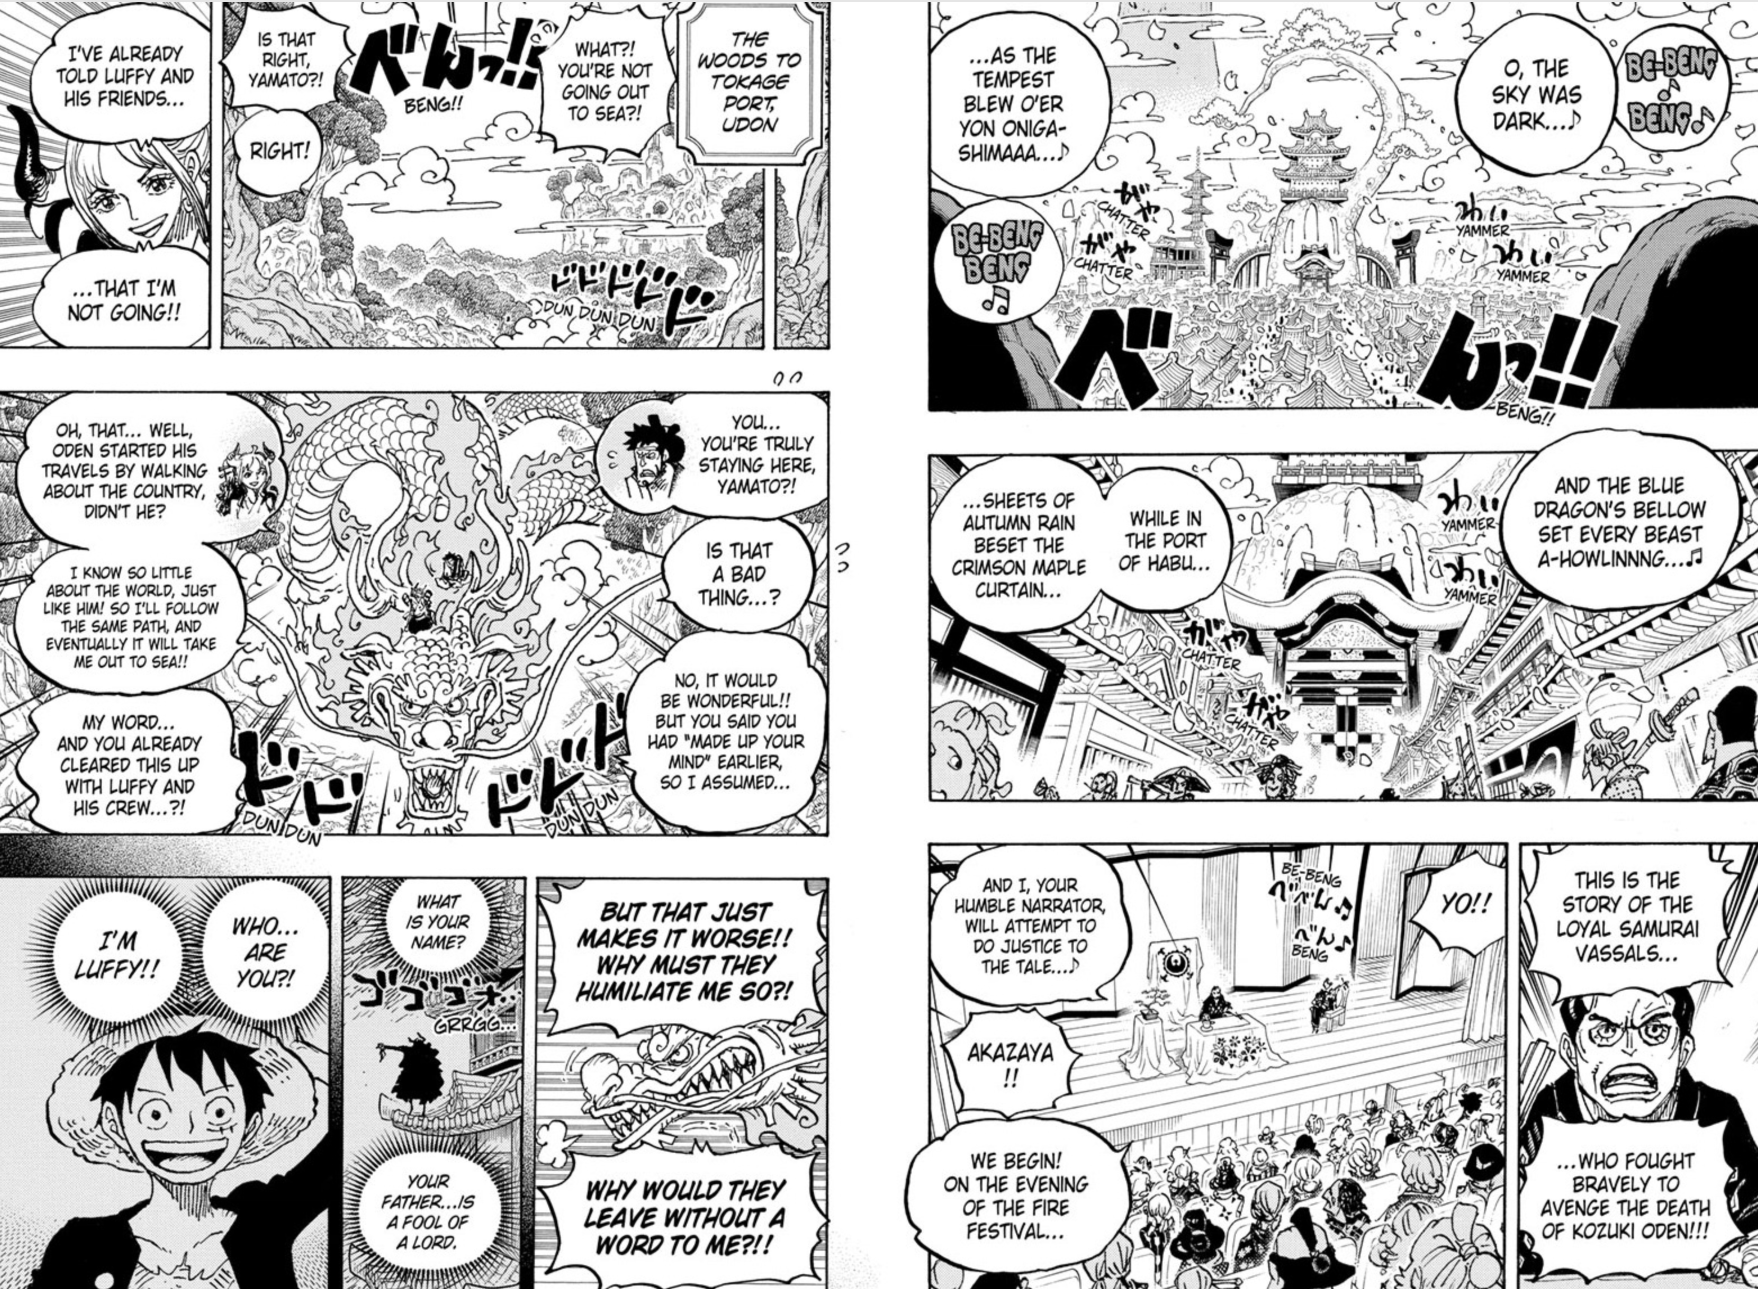 One Piece Chapter 1057 Pages 2-3